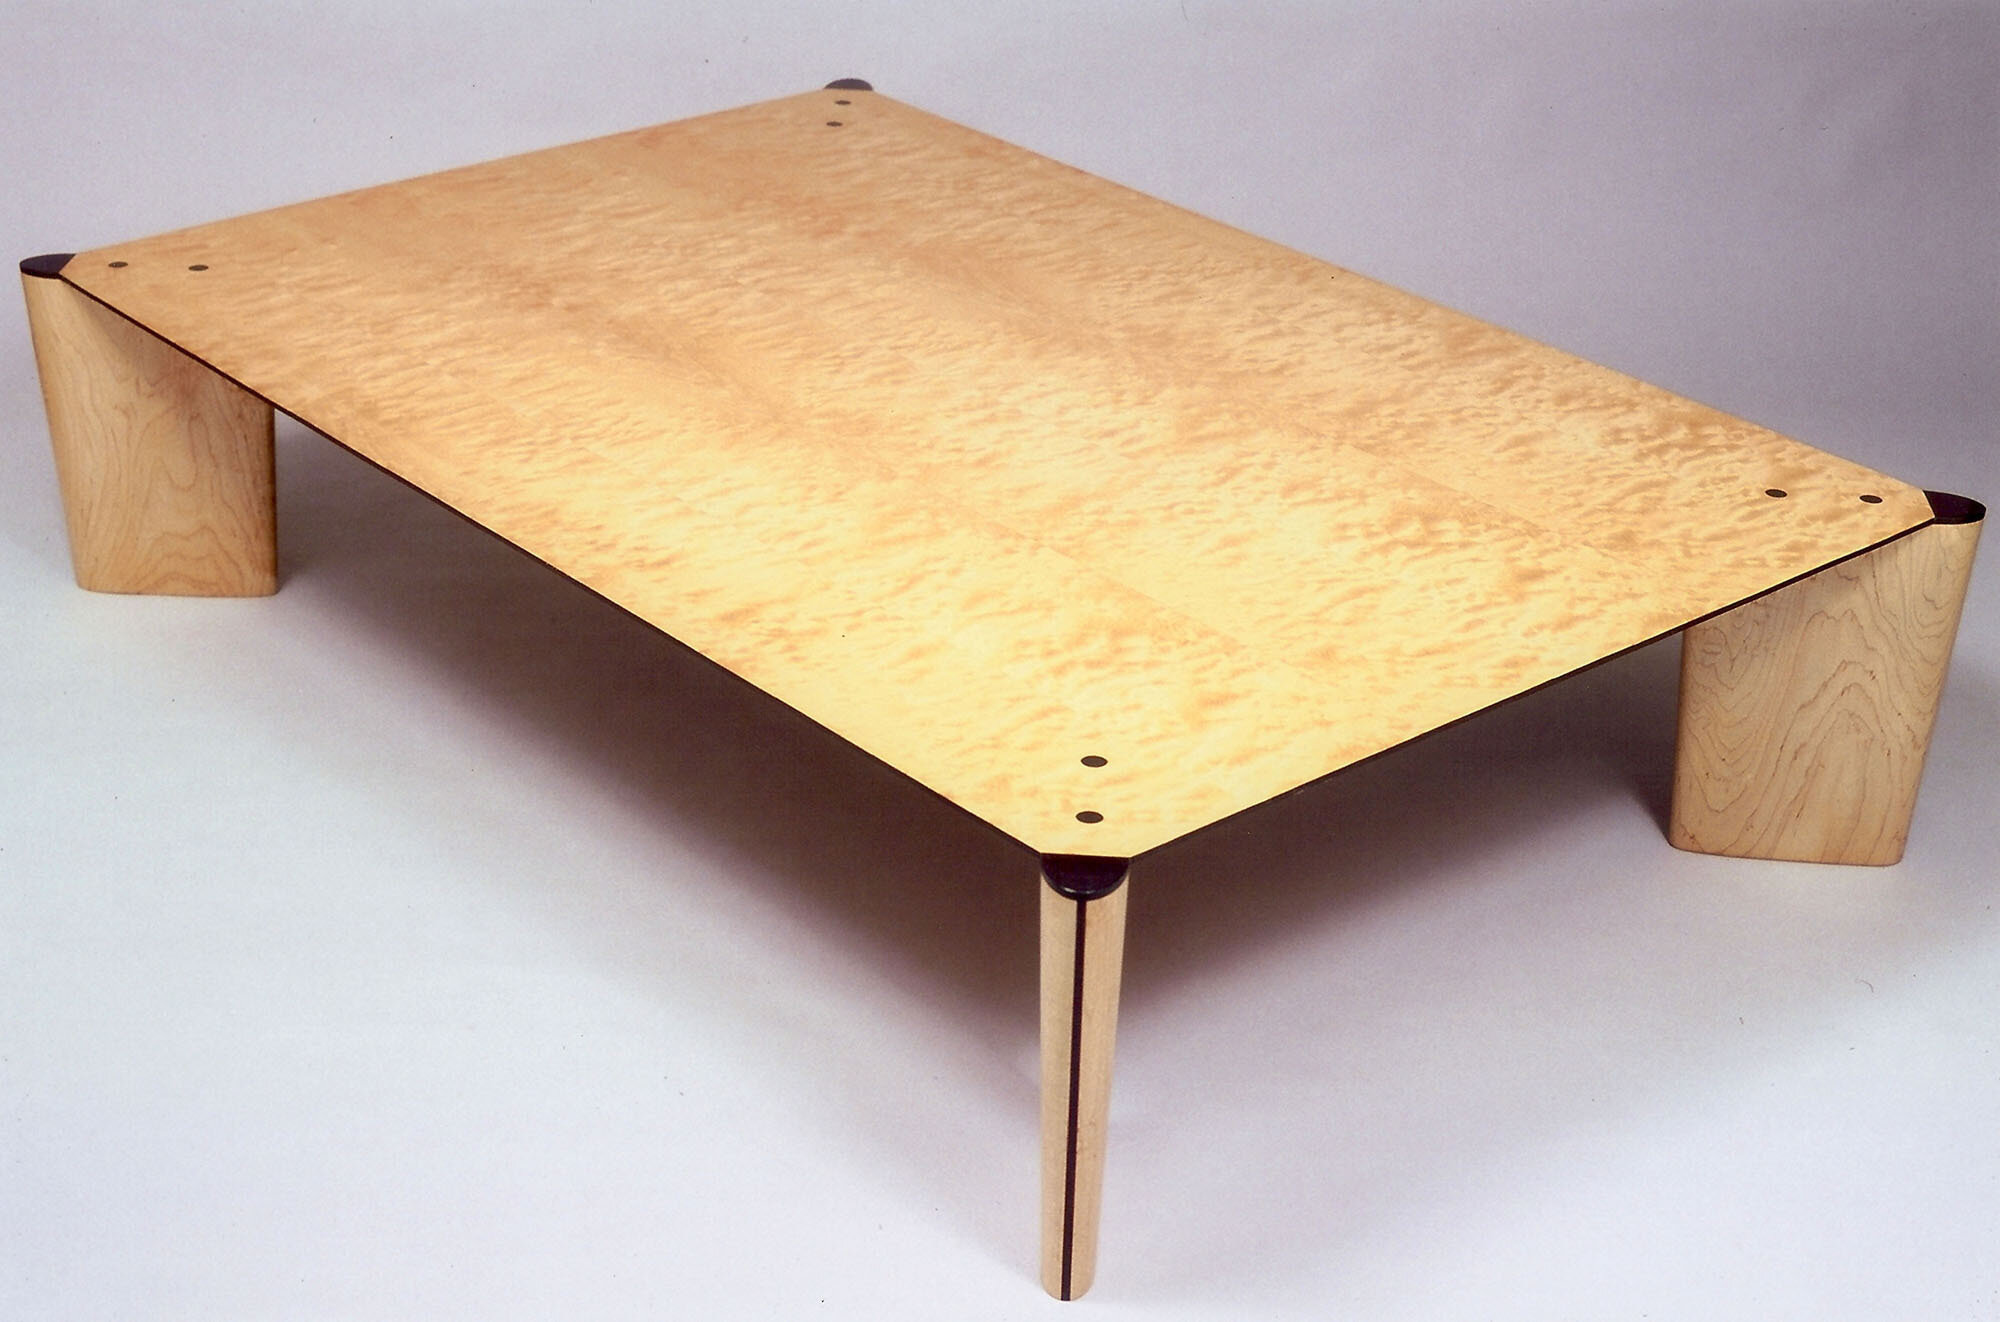 Lo Coffee Table by Todd Ouwehand